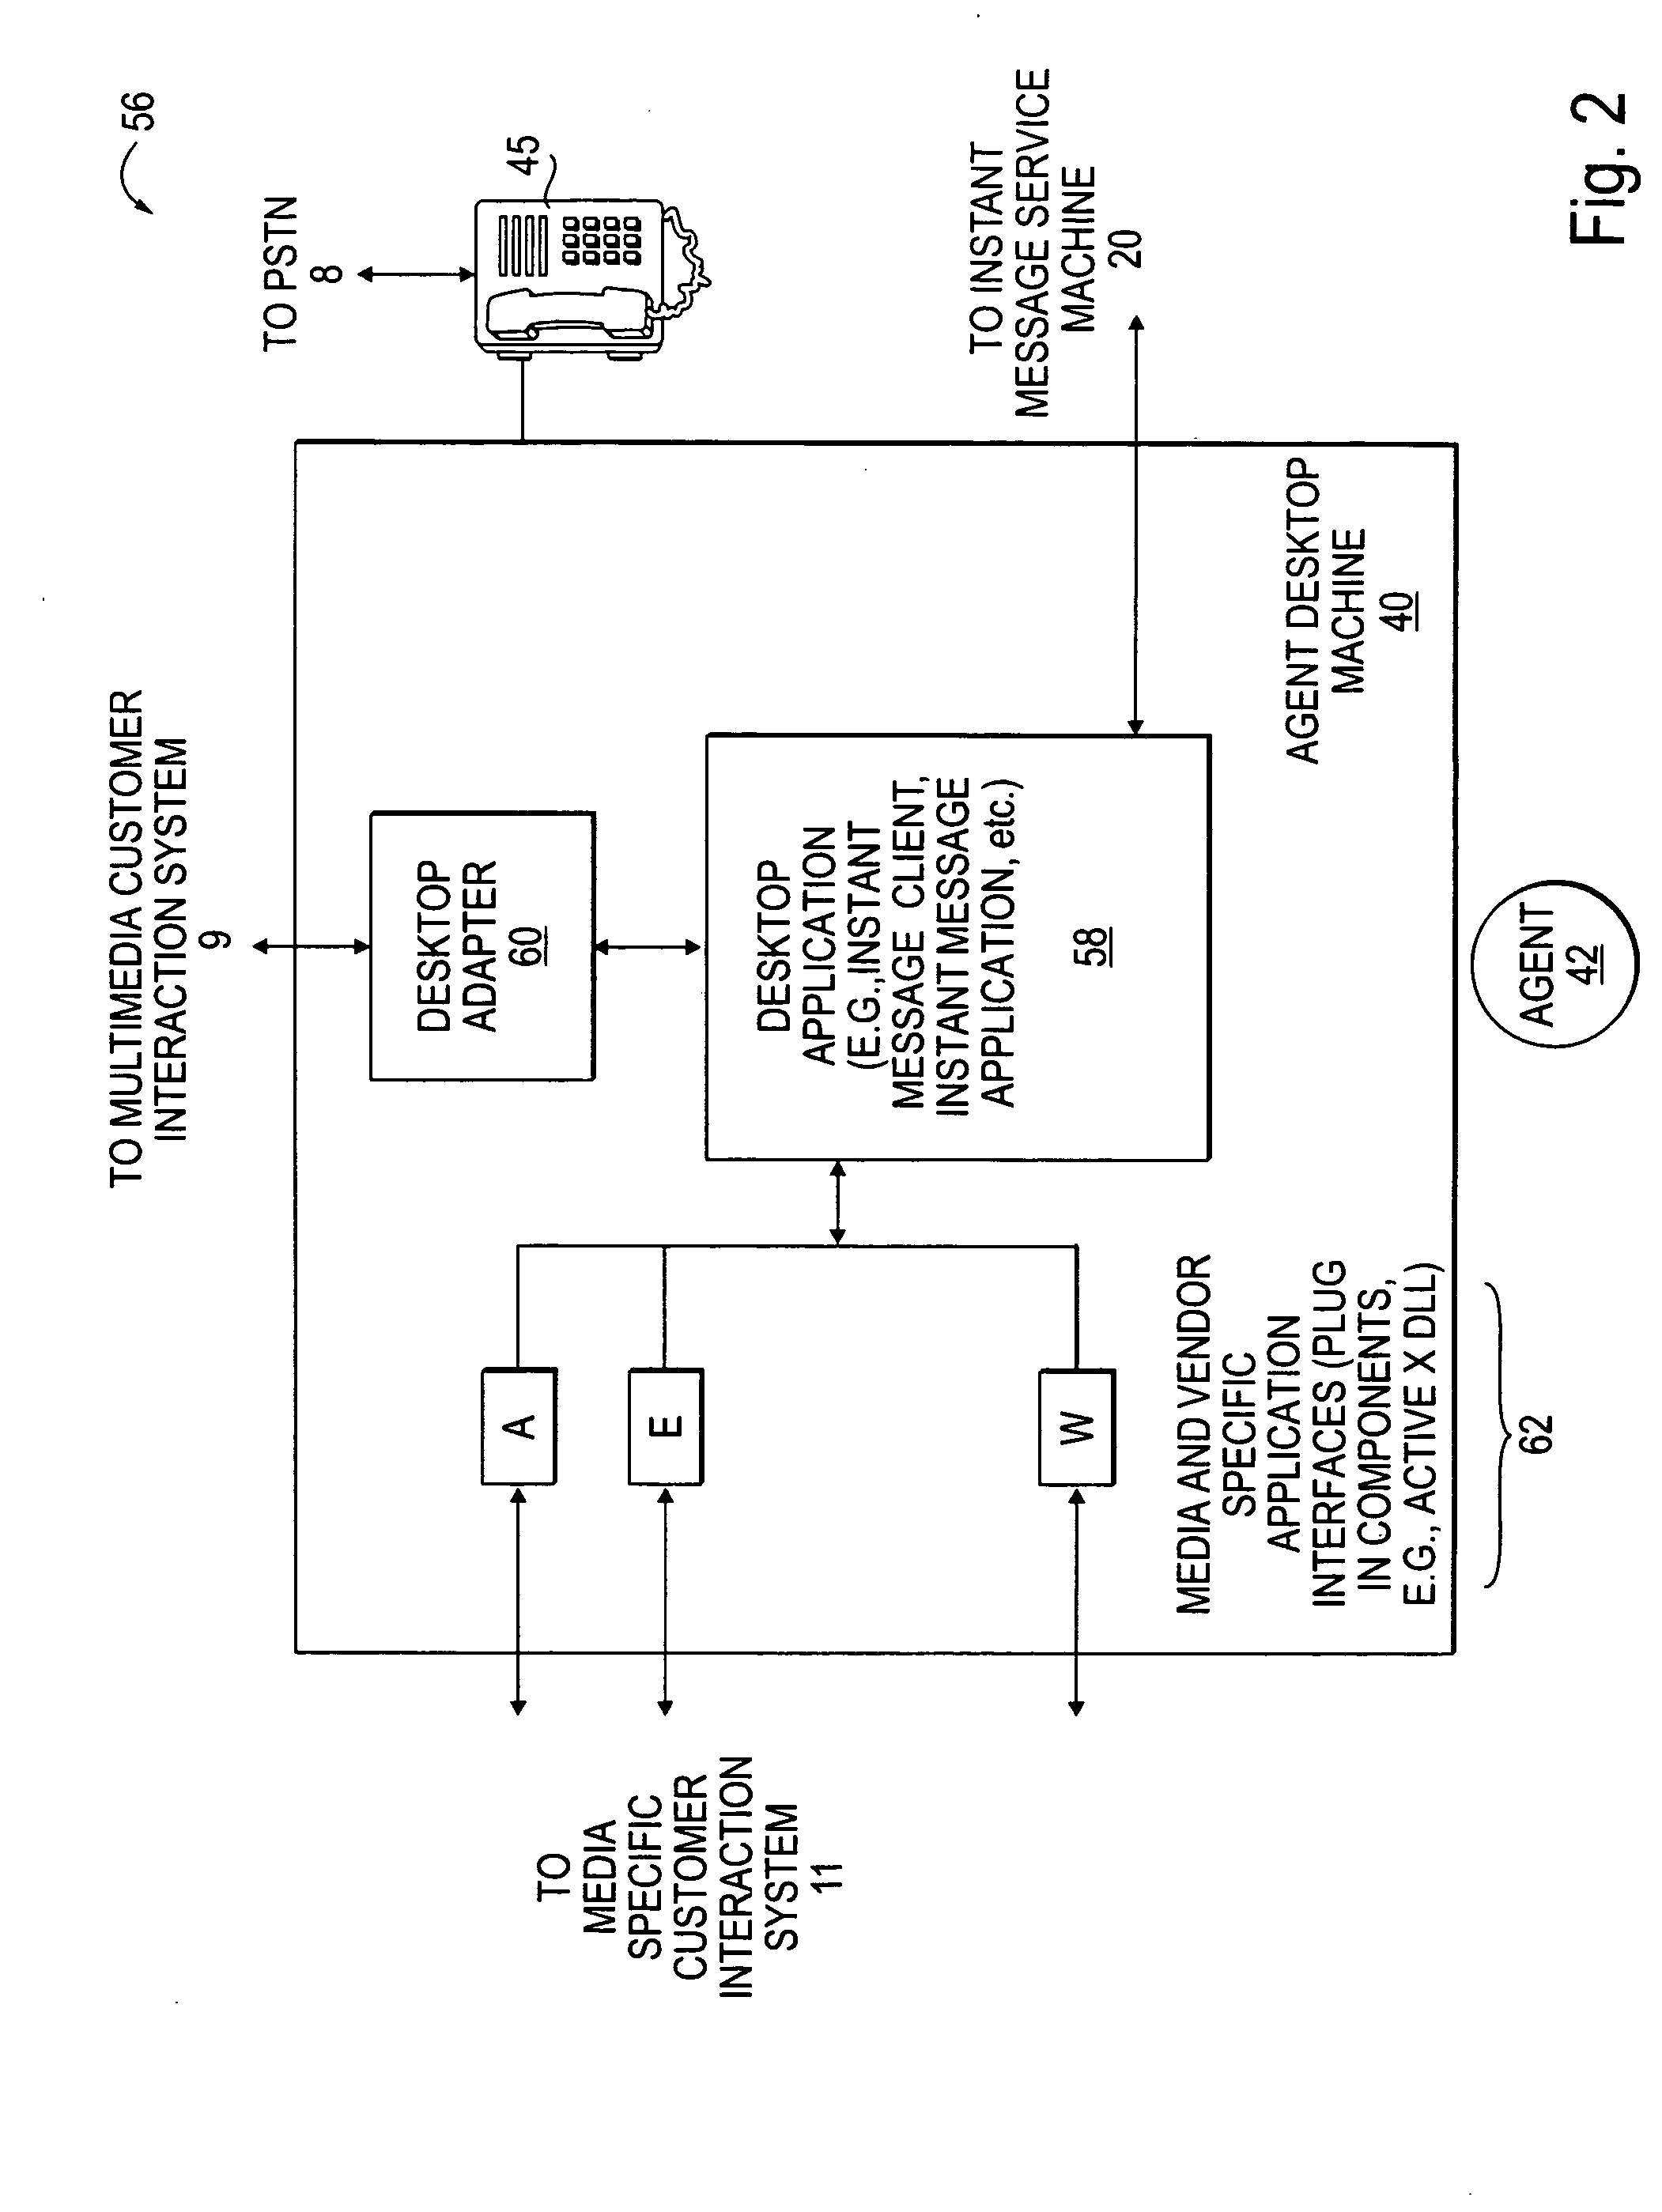 Method and system to provide expert support with a customer interaction system